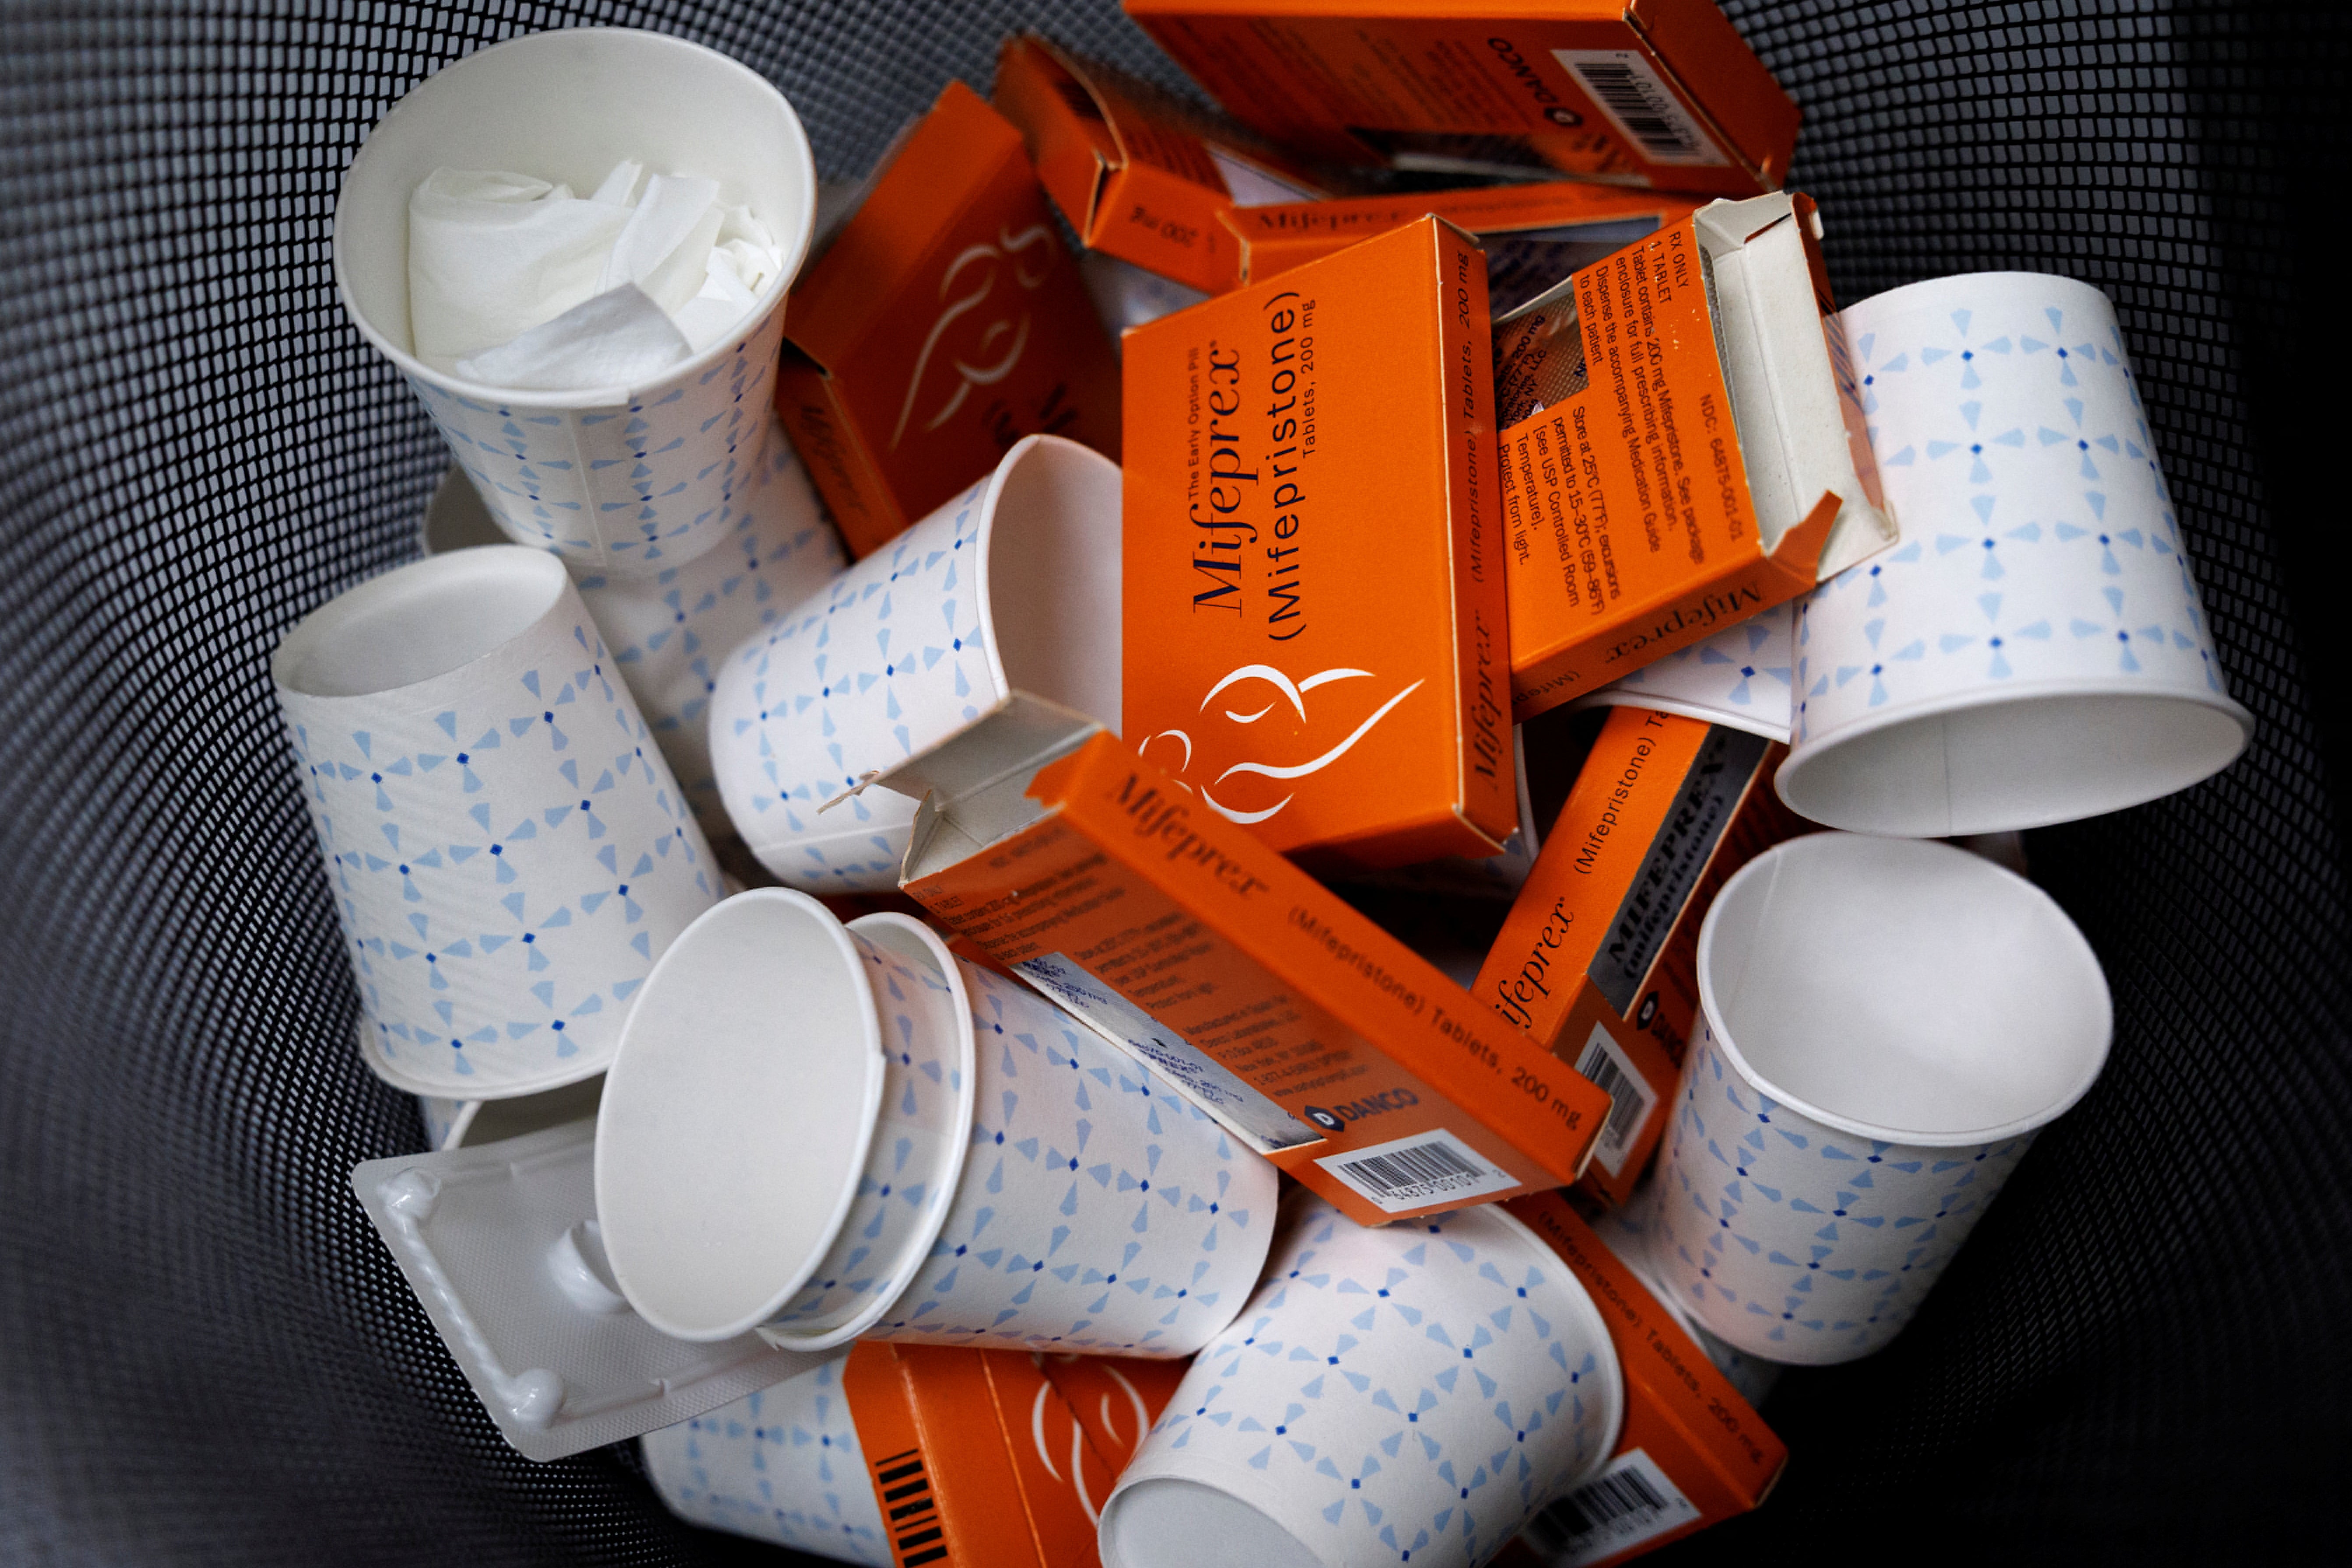 Empty mifepristone boxes and paper cups fill a trash can